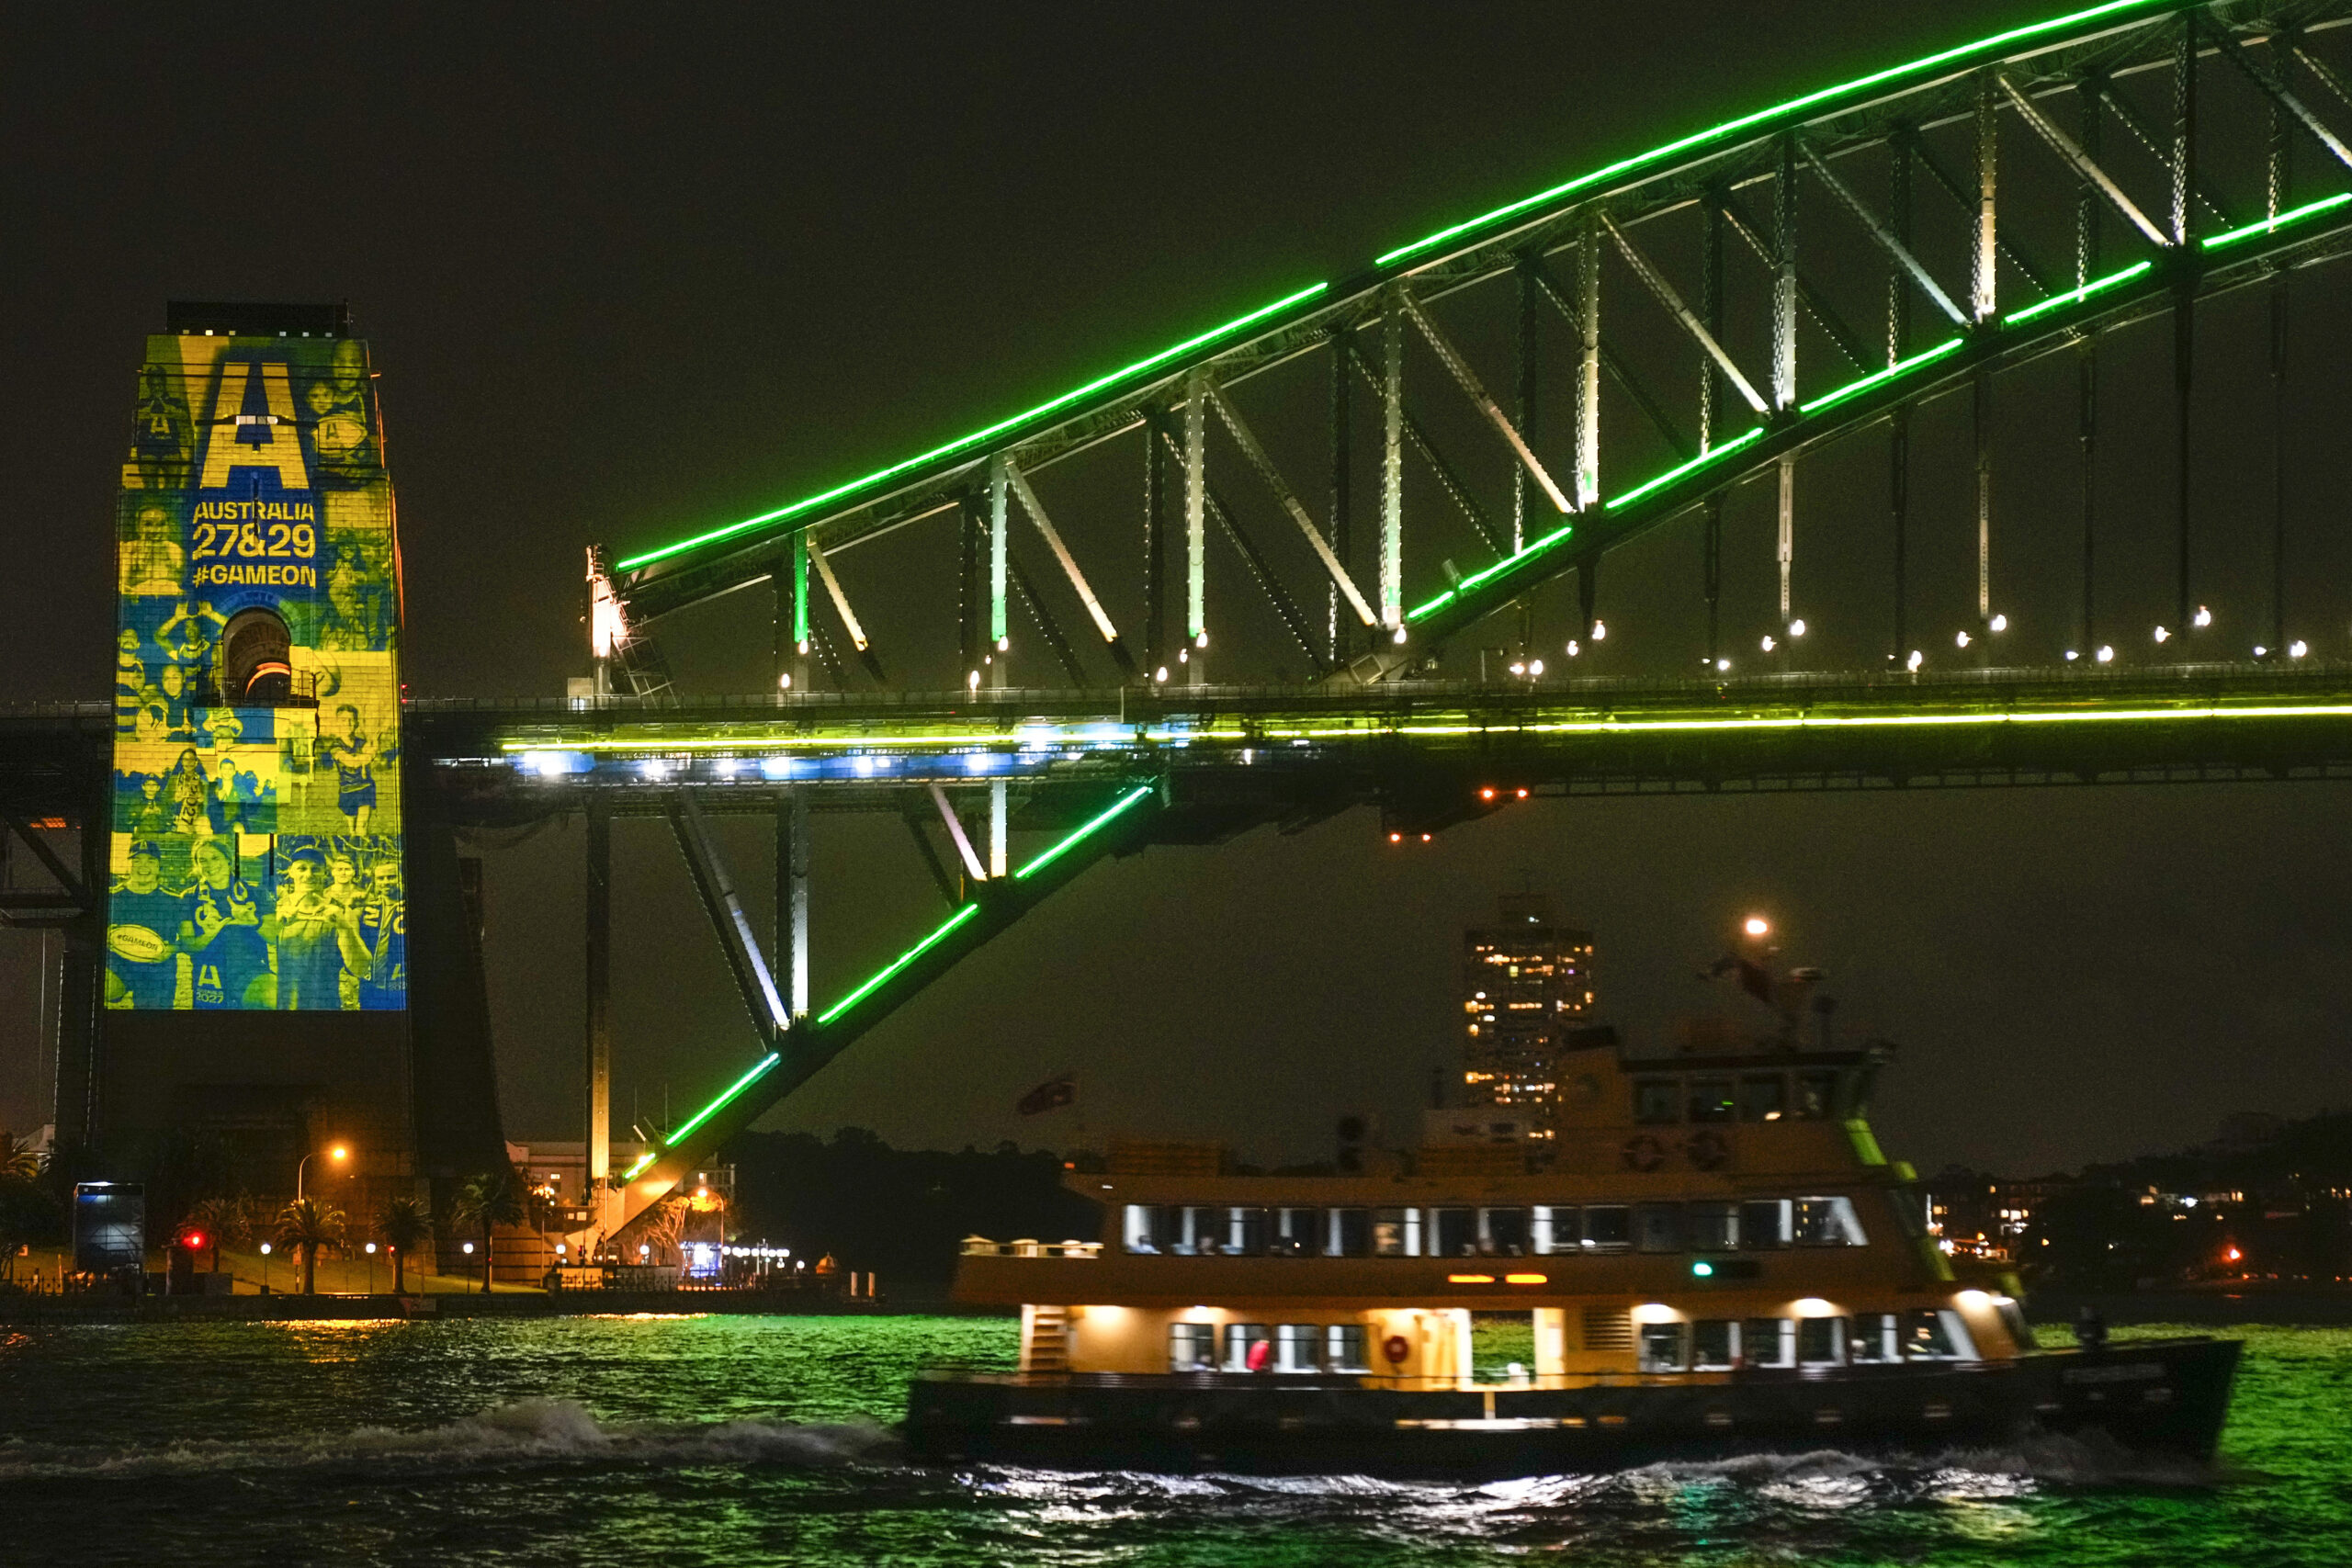 A Sydney ferry sails past the illuminated pylon of the Sydney Harbour Bridge ahead of the final vote for the hosting of the Rugby World Cups, Thursday, May 12, 2022. World Rugby will announce the host nations for the men's and women's World Cups for the period 2025-2033 with Australia heavily favored to host the men's 2027 and women's tournaments in 2029. (AP Photo/Mark Baker)